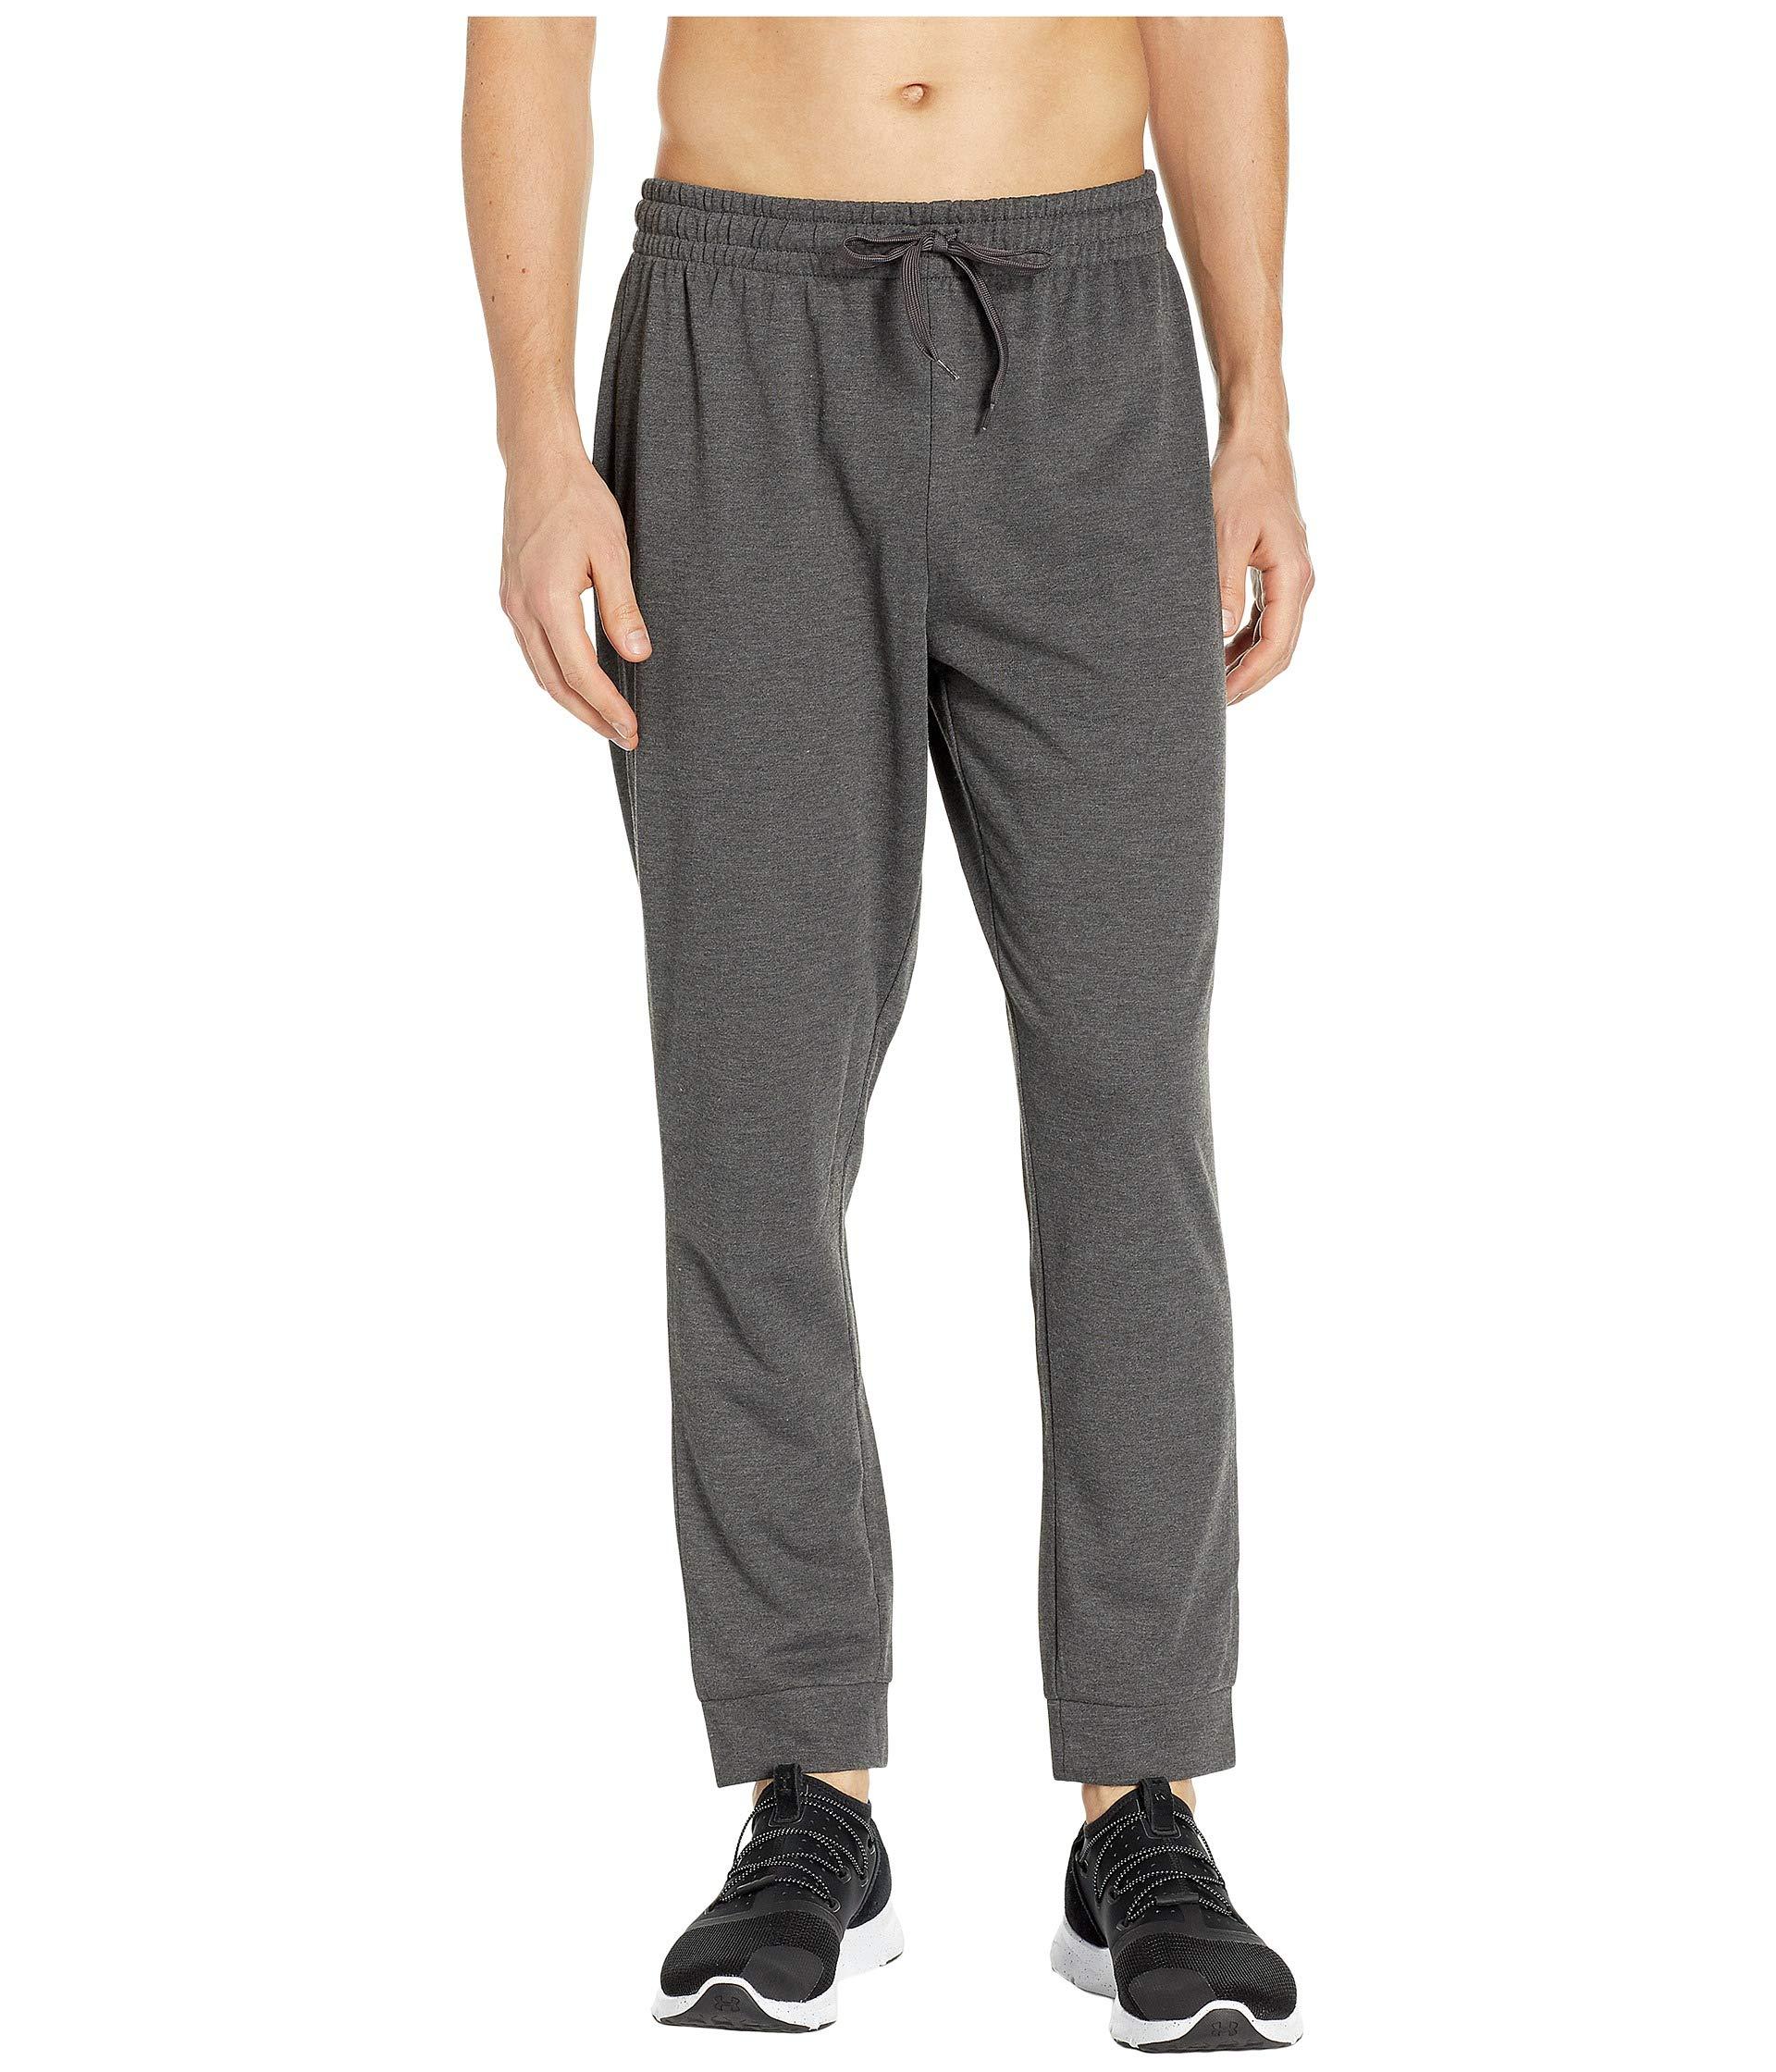 Jockey Active Synthetic French Terry Pants in Charcoal Grey Heather ...